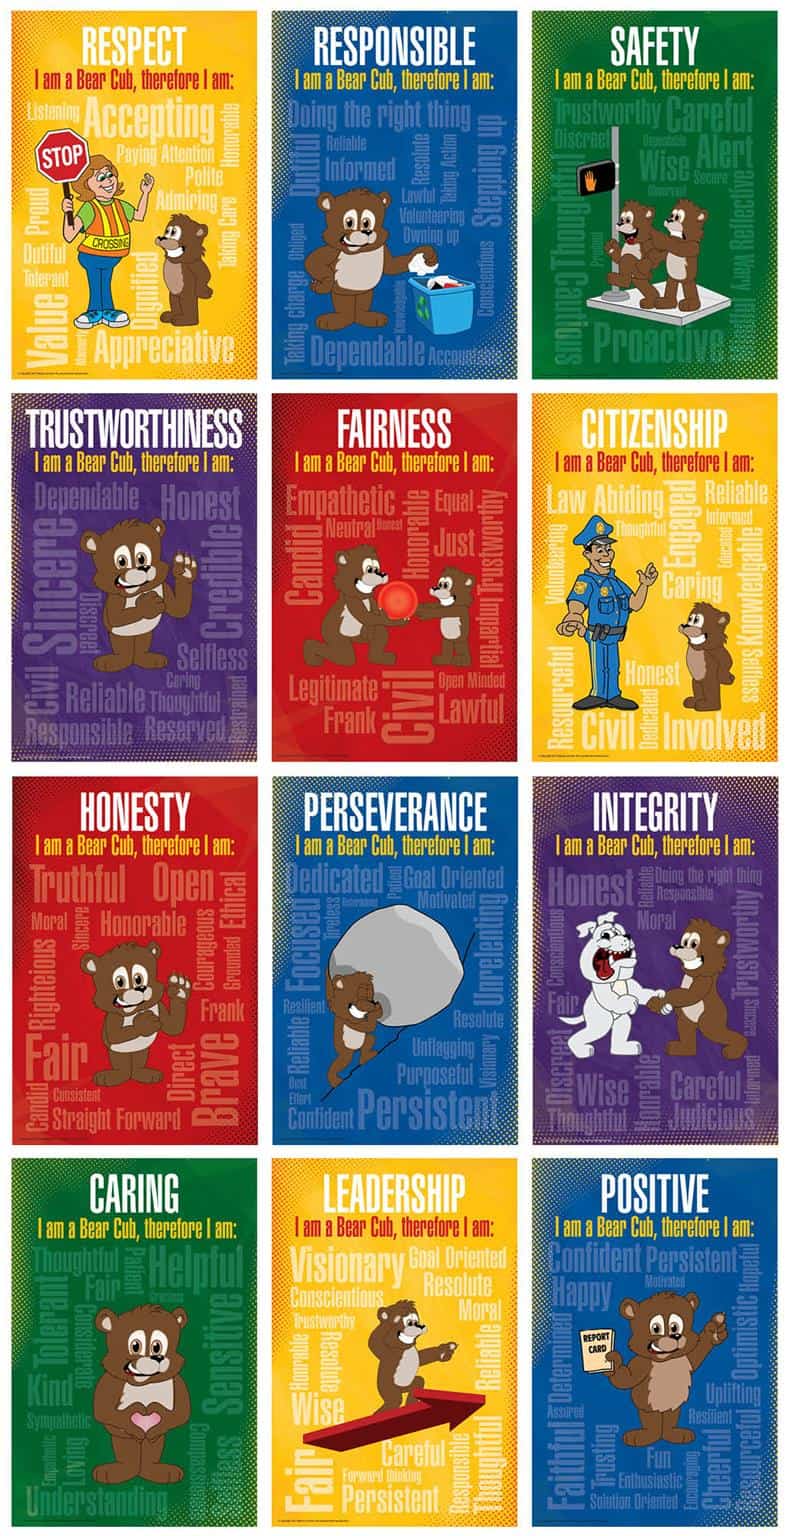 Bear Mascot - Posters, Banners & Signs